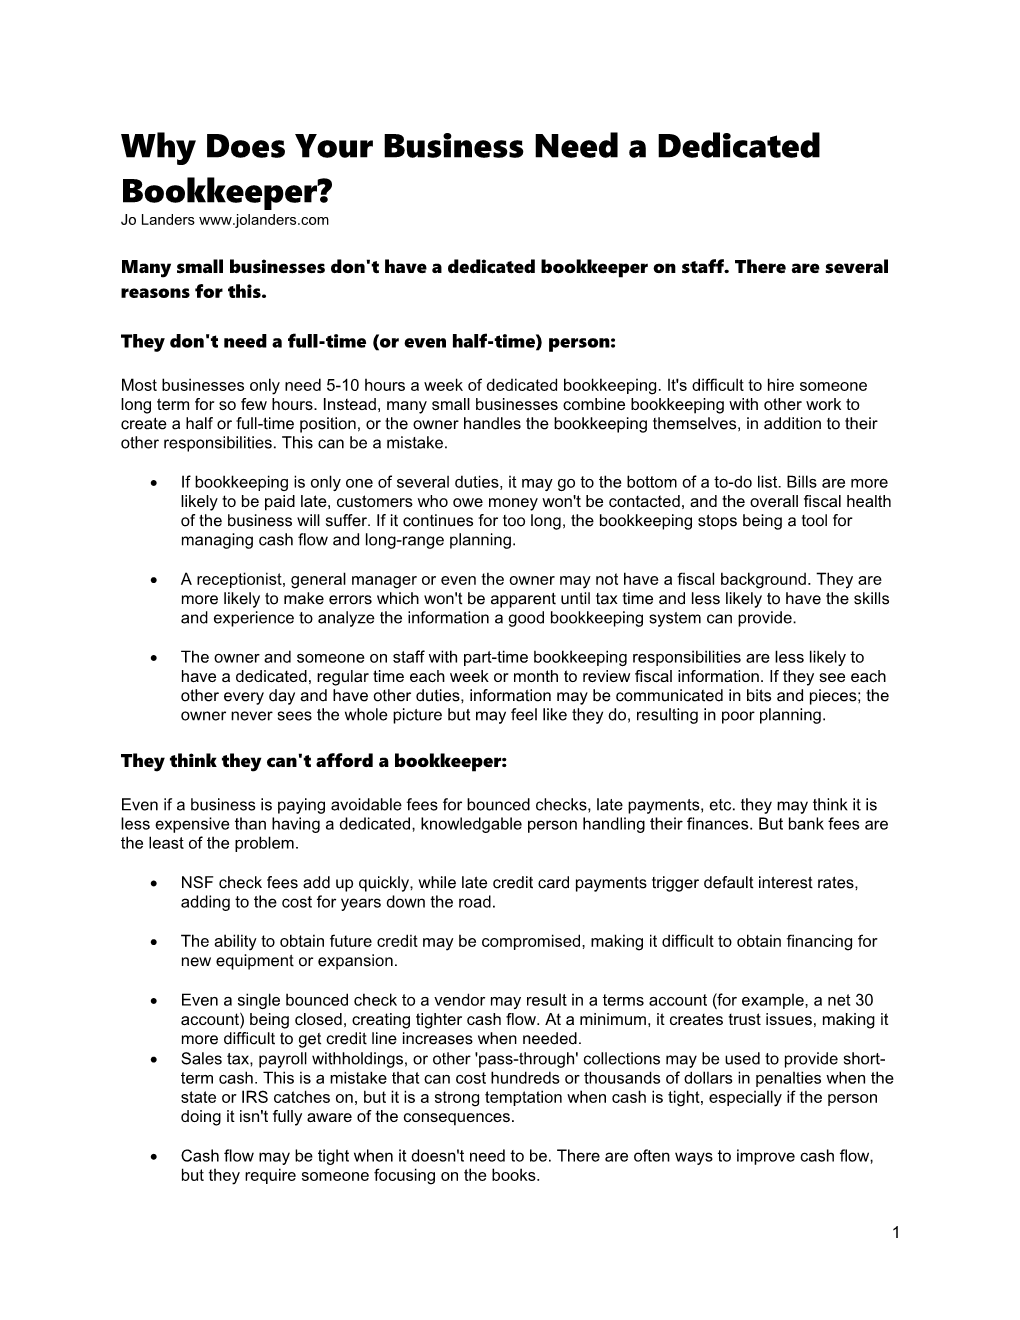 Why Does Your Business Need a Dedicated Bookkeeper?